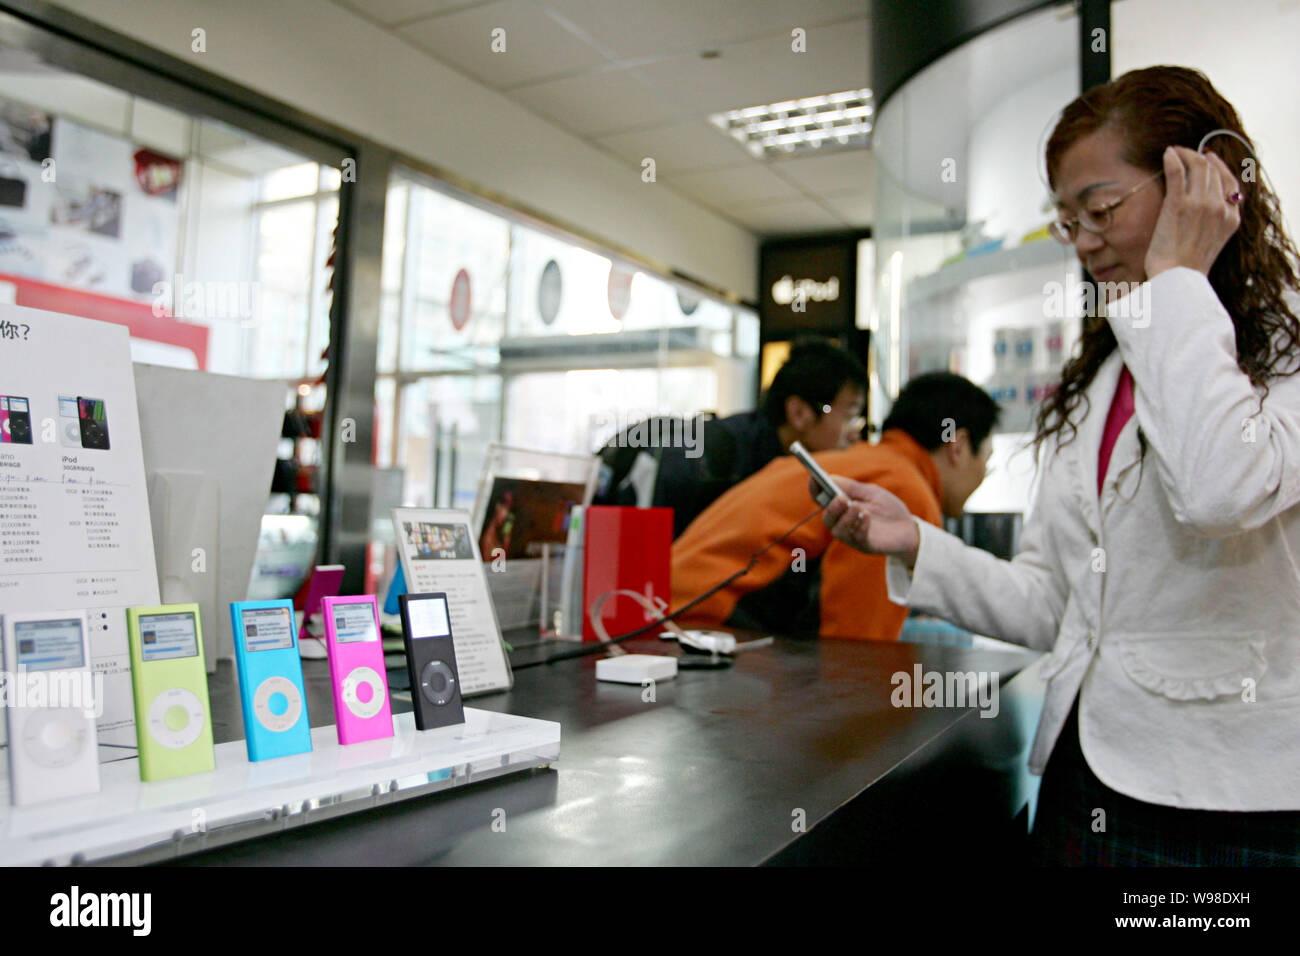 --FILE--Chinese customers try out Apple iPod nano music players at a digital products store in Shanghai, China, 16 April 2007.   Apple has unveiled a Stock Photo